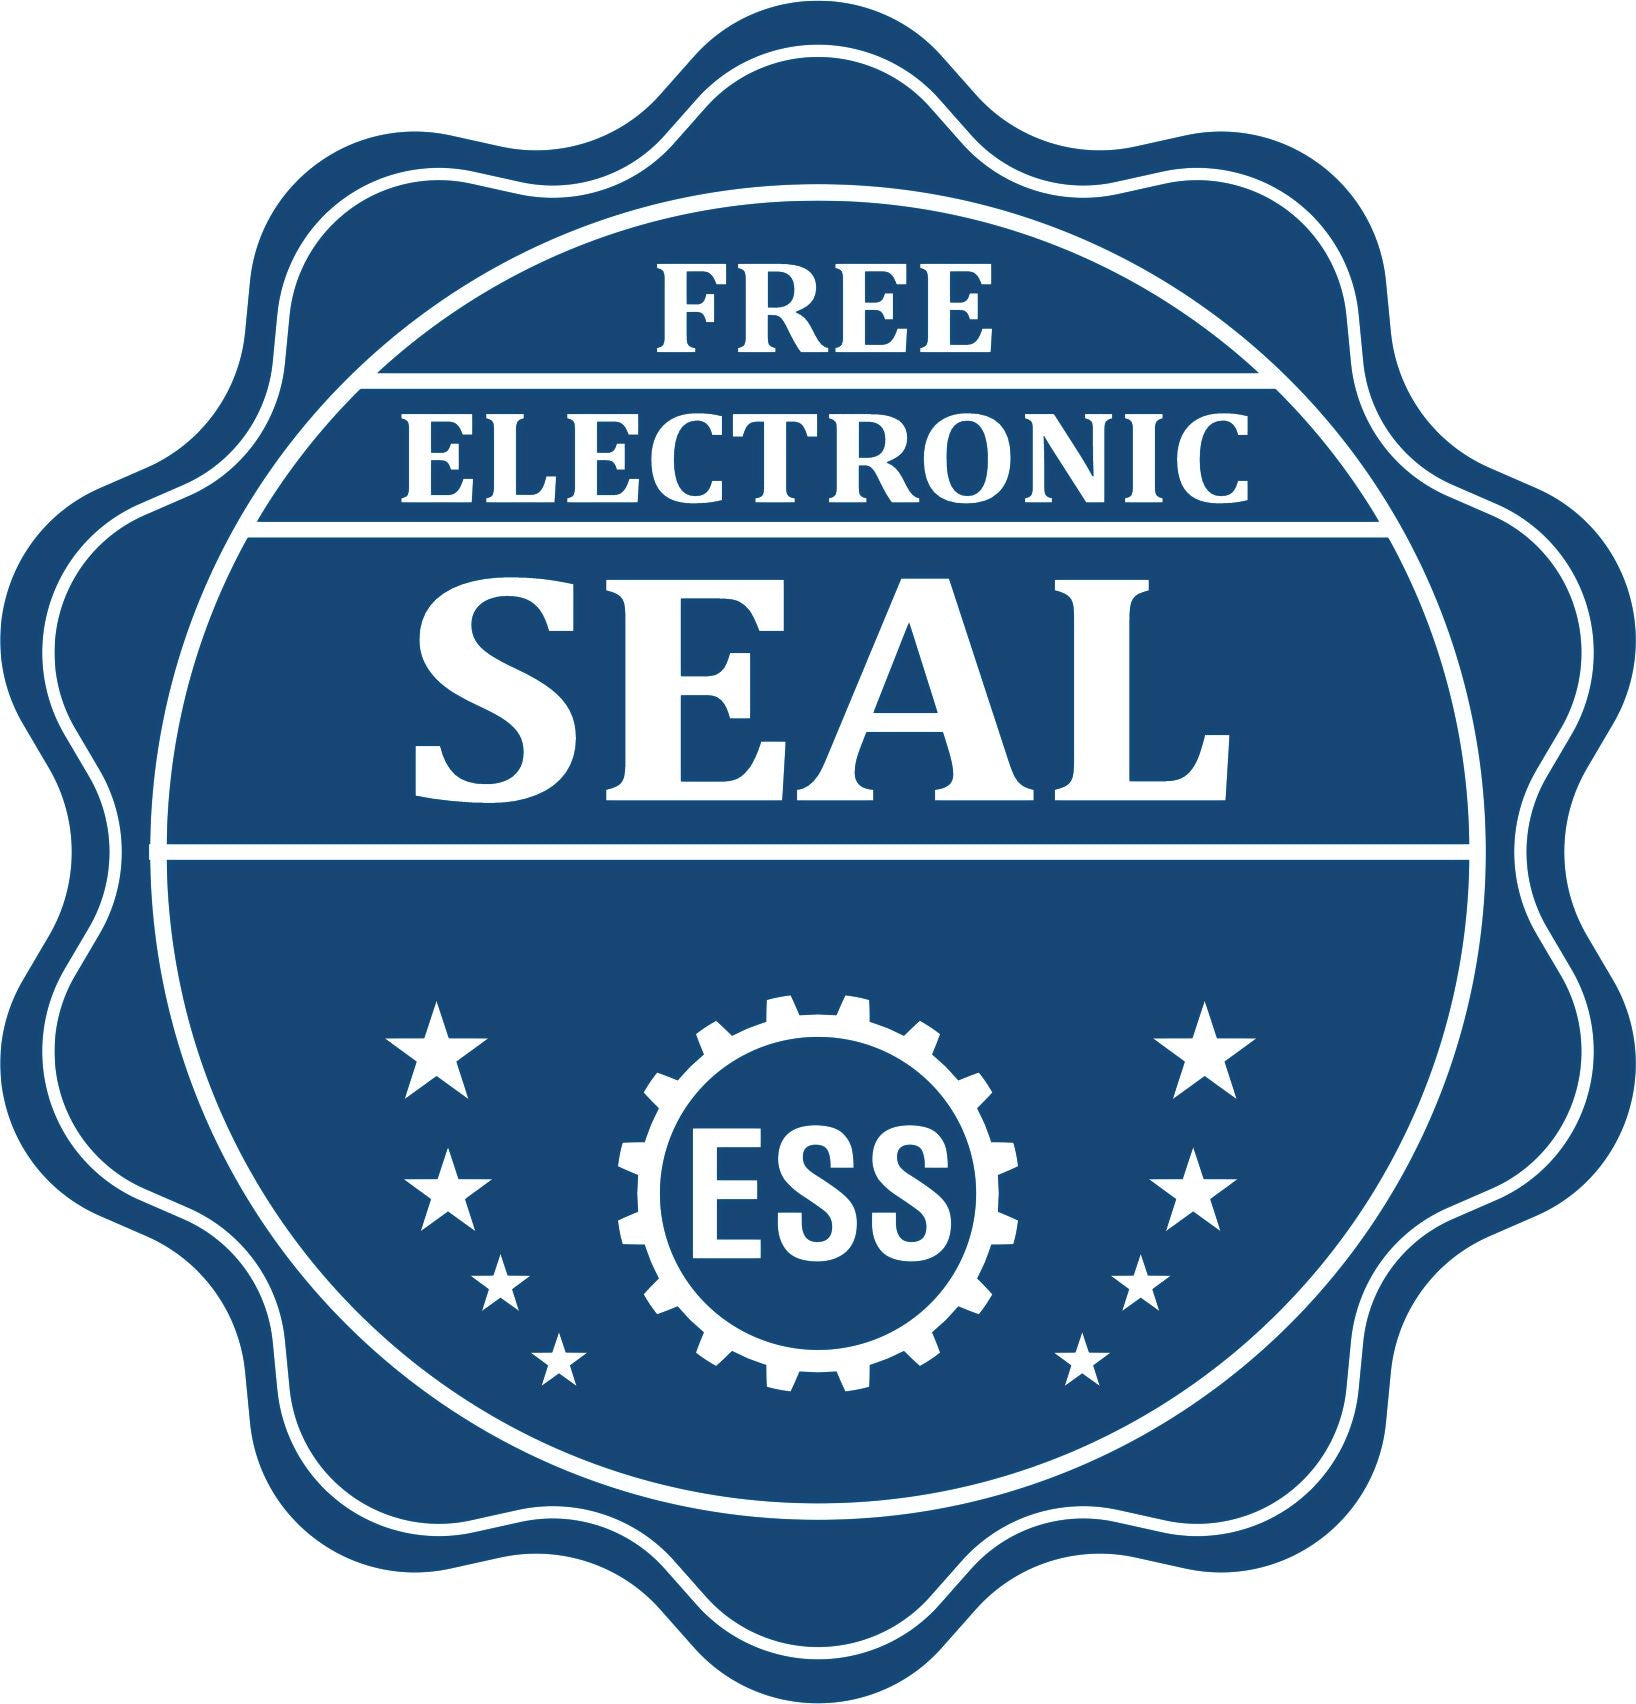 A badge showing a free electronic seal for the MaxLight Premium Pre-Inked Oklahoma State Seal Notarial Stamp with stars and the ESS gear on the emblem.